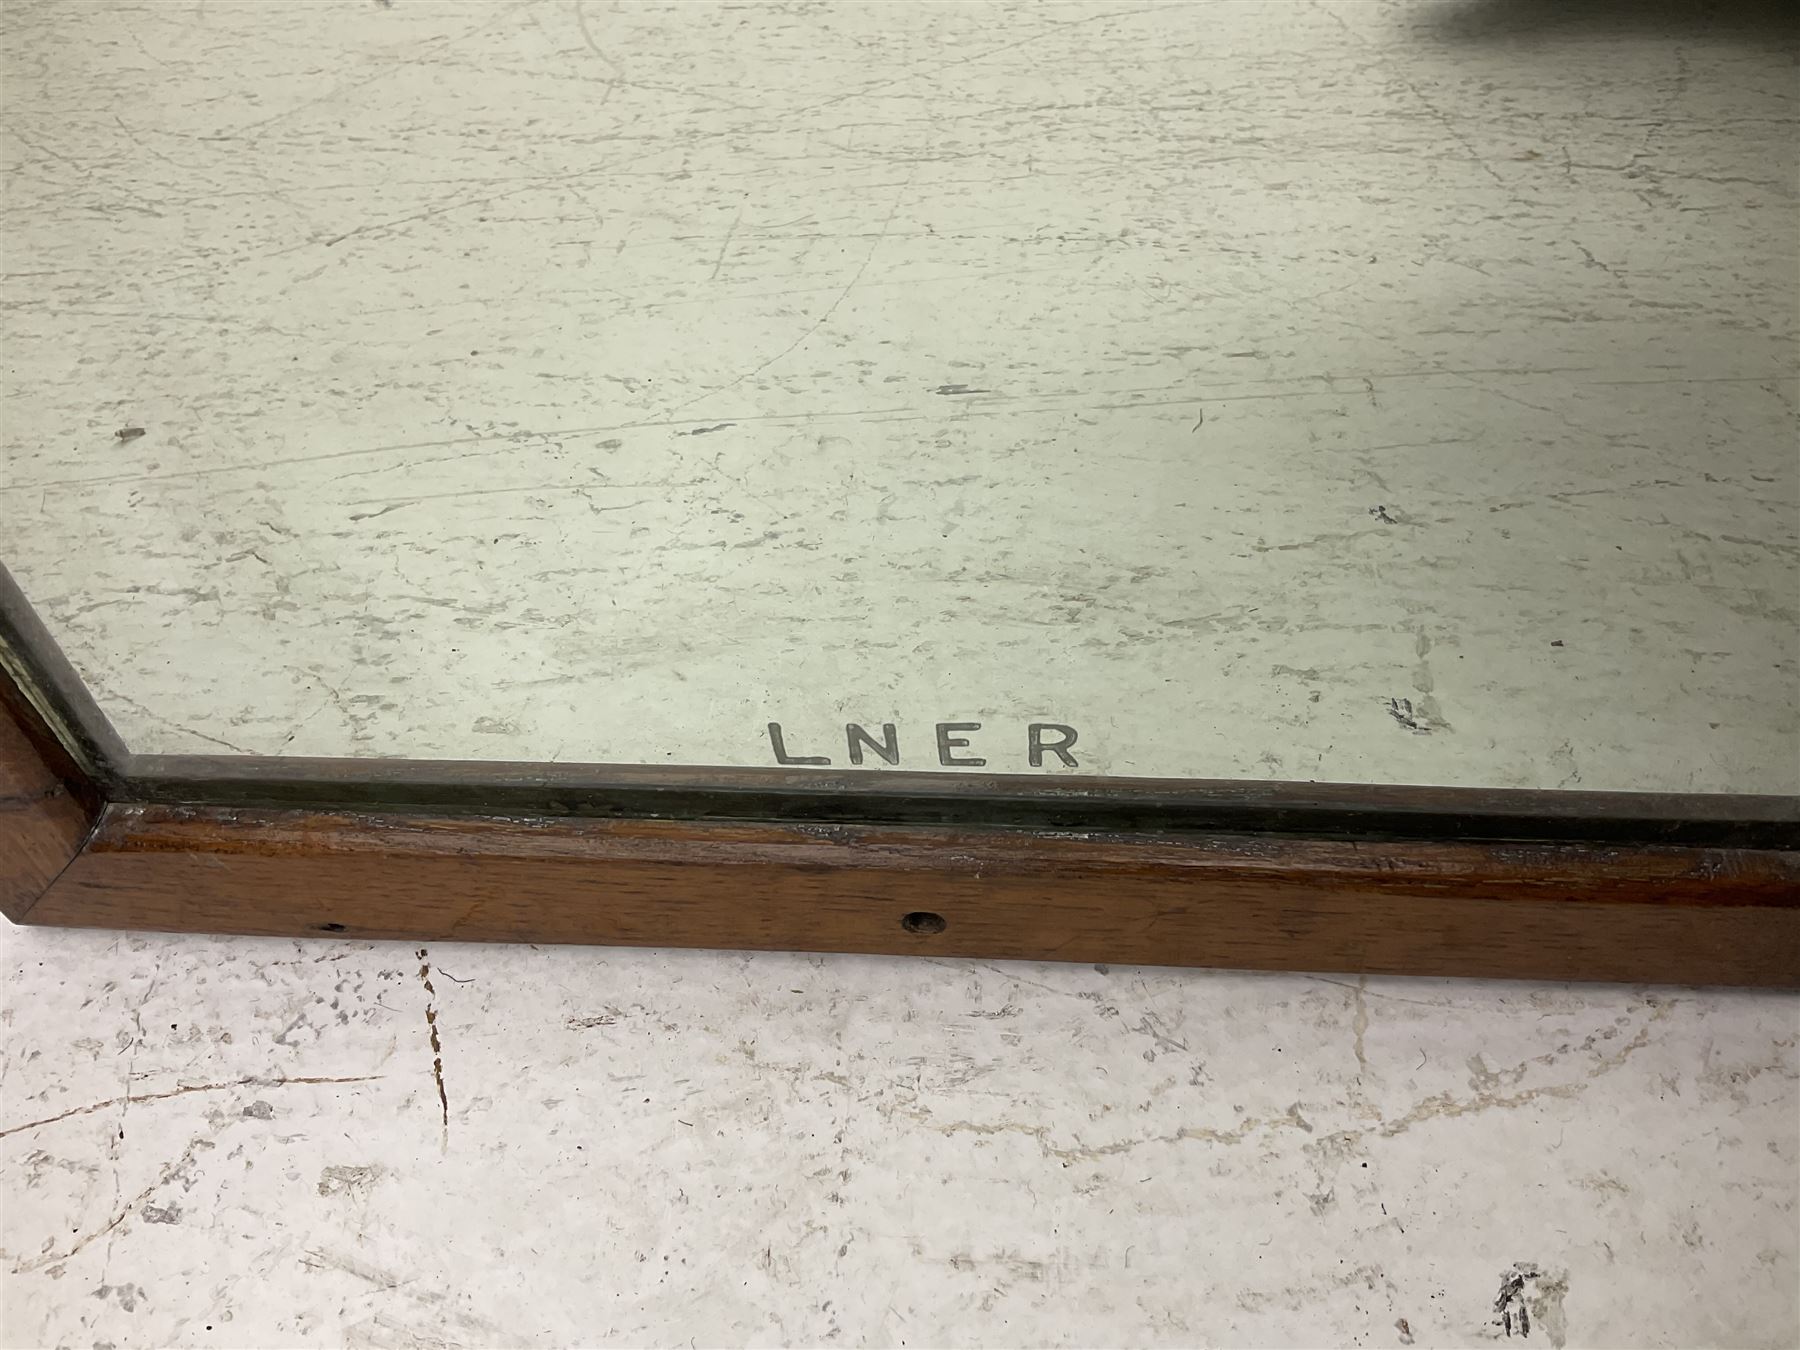 LNER wall mirror in wooden frame - Image 2 of 3